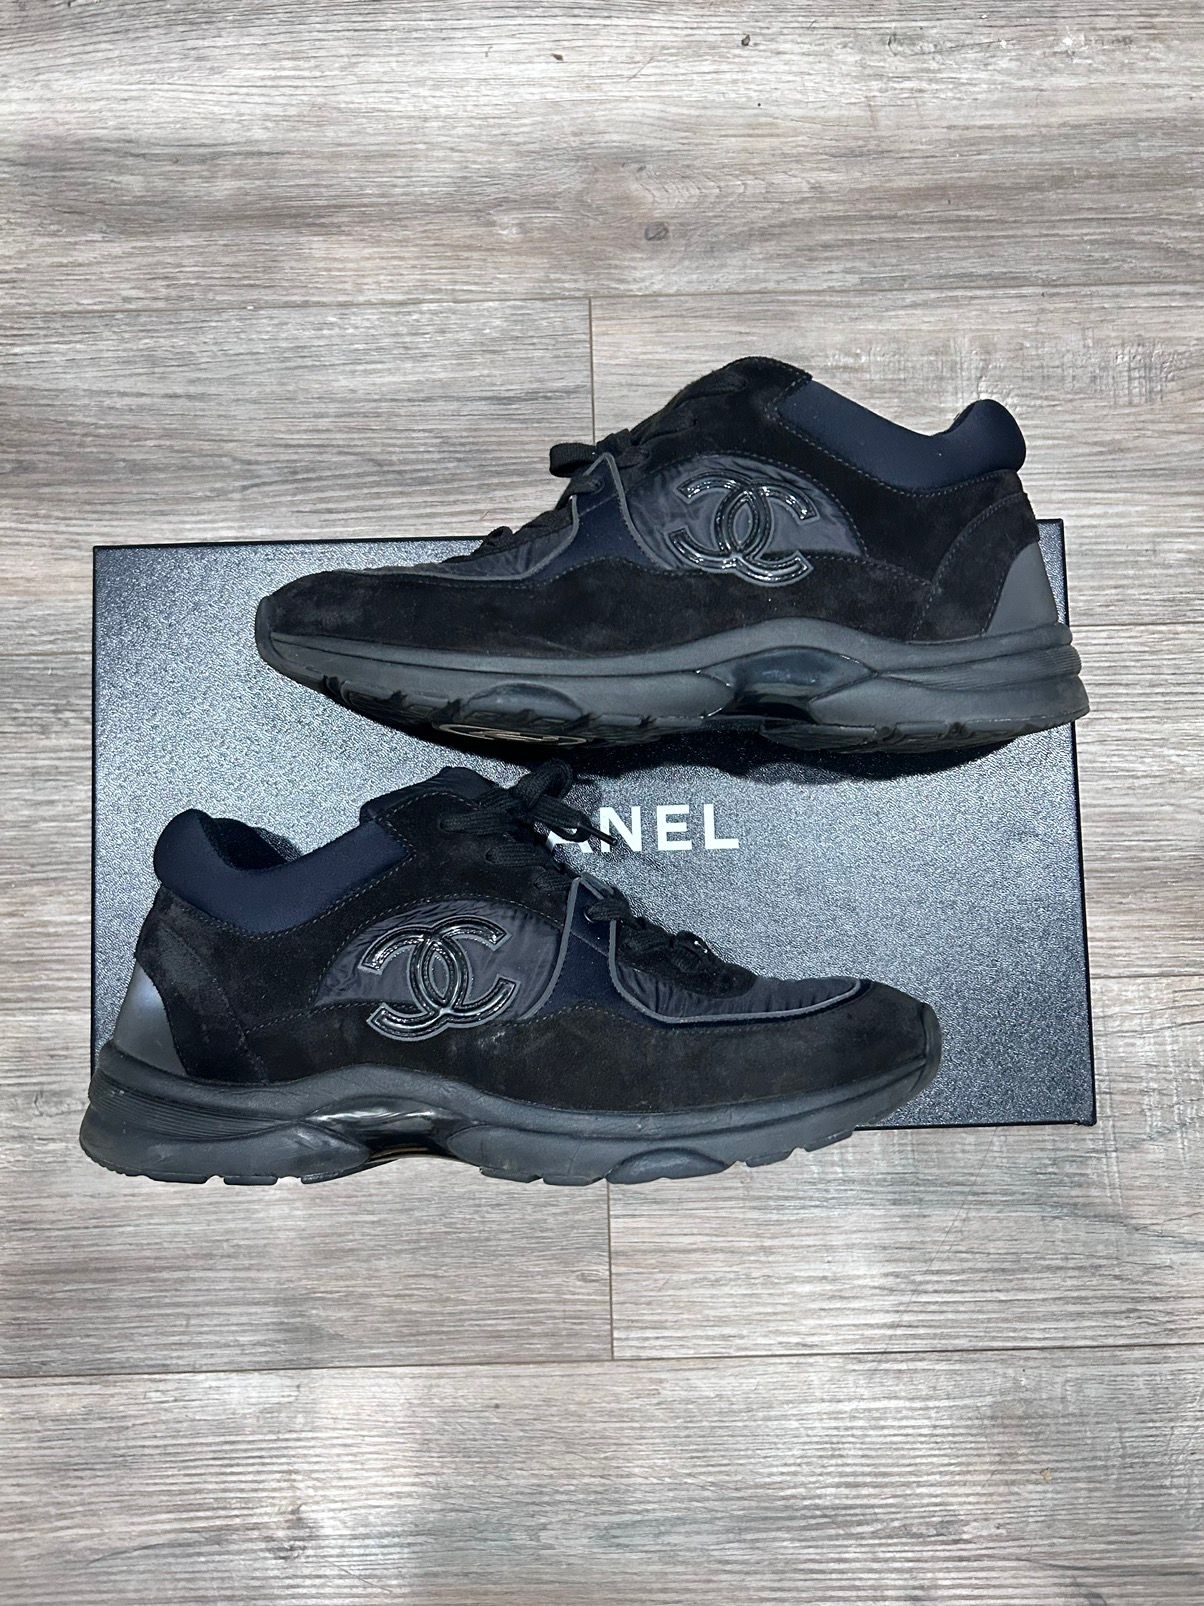 Pre-Owned & Vintage CHANEL Sneakers for Men